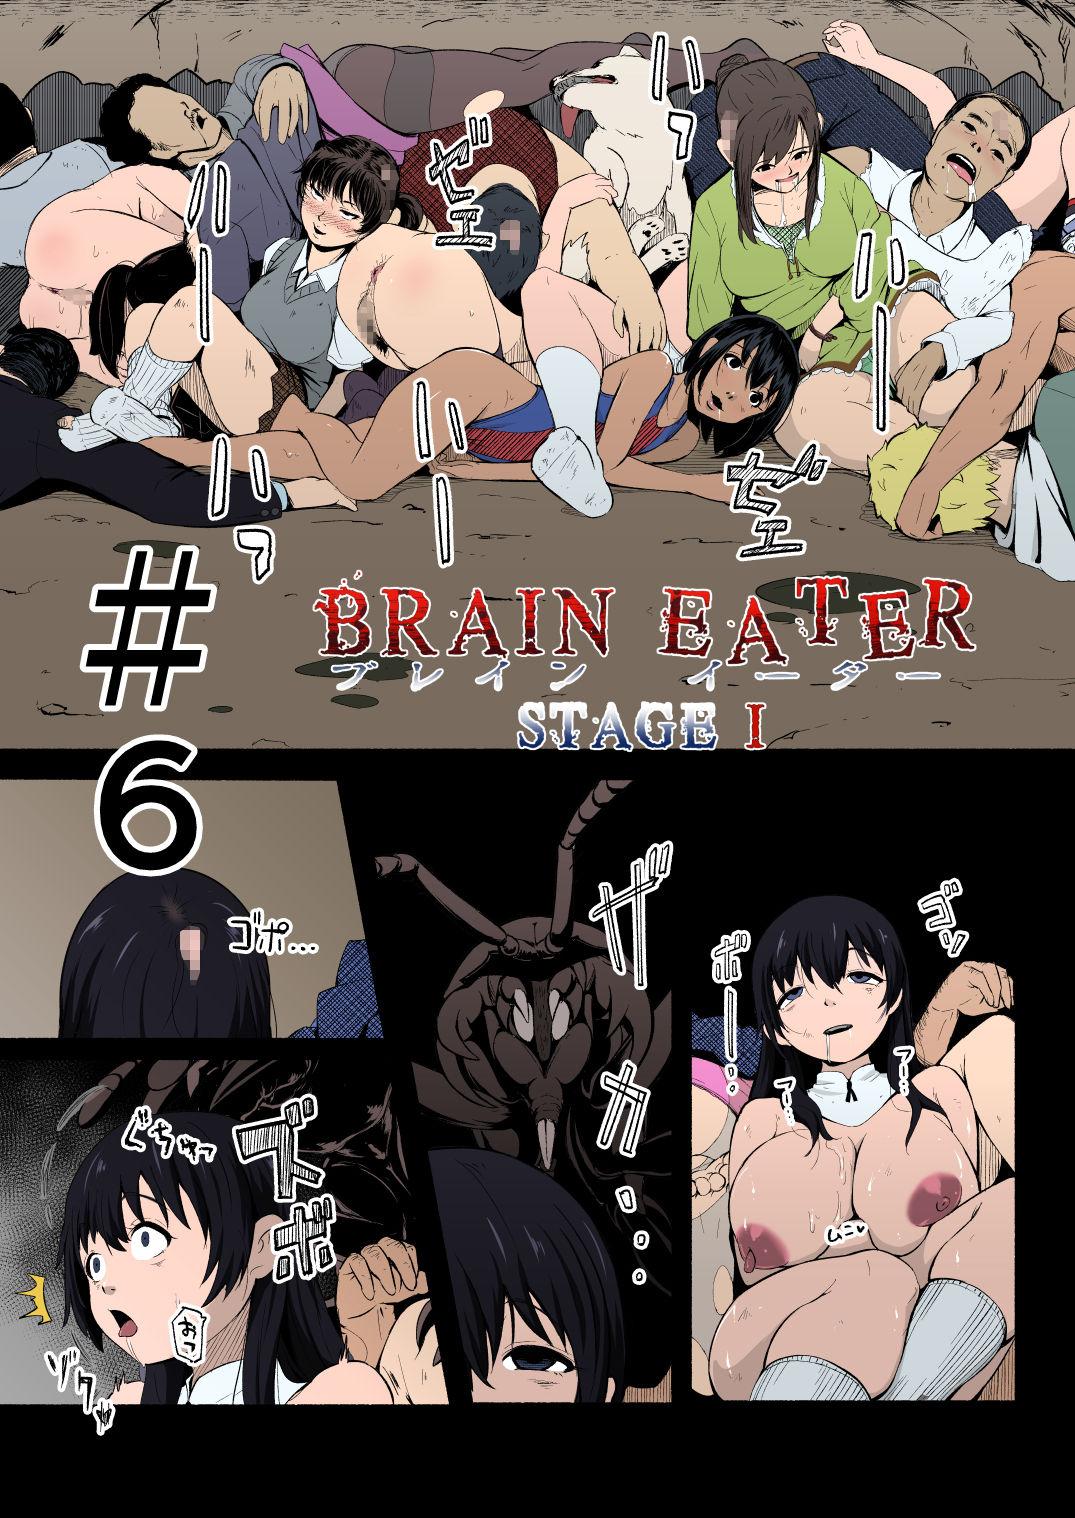 Brain Eater Stage 1 #5-6 68